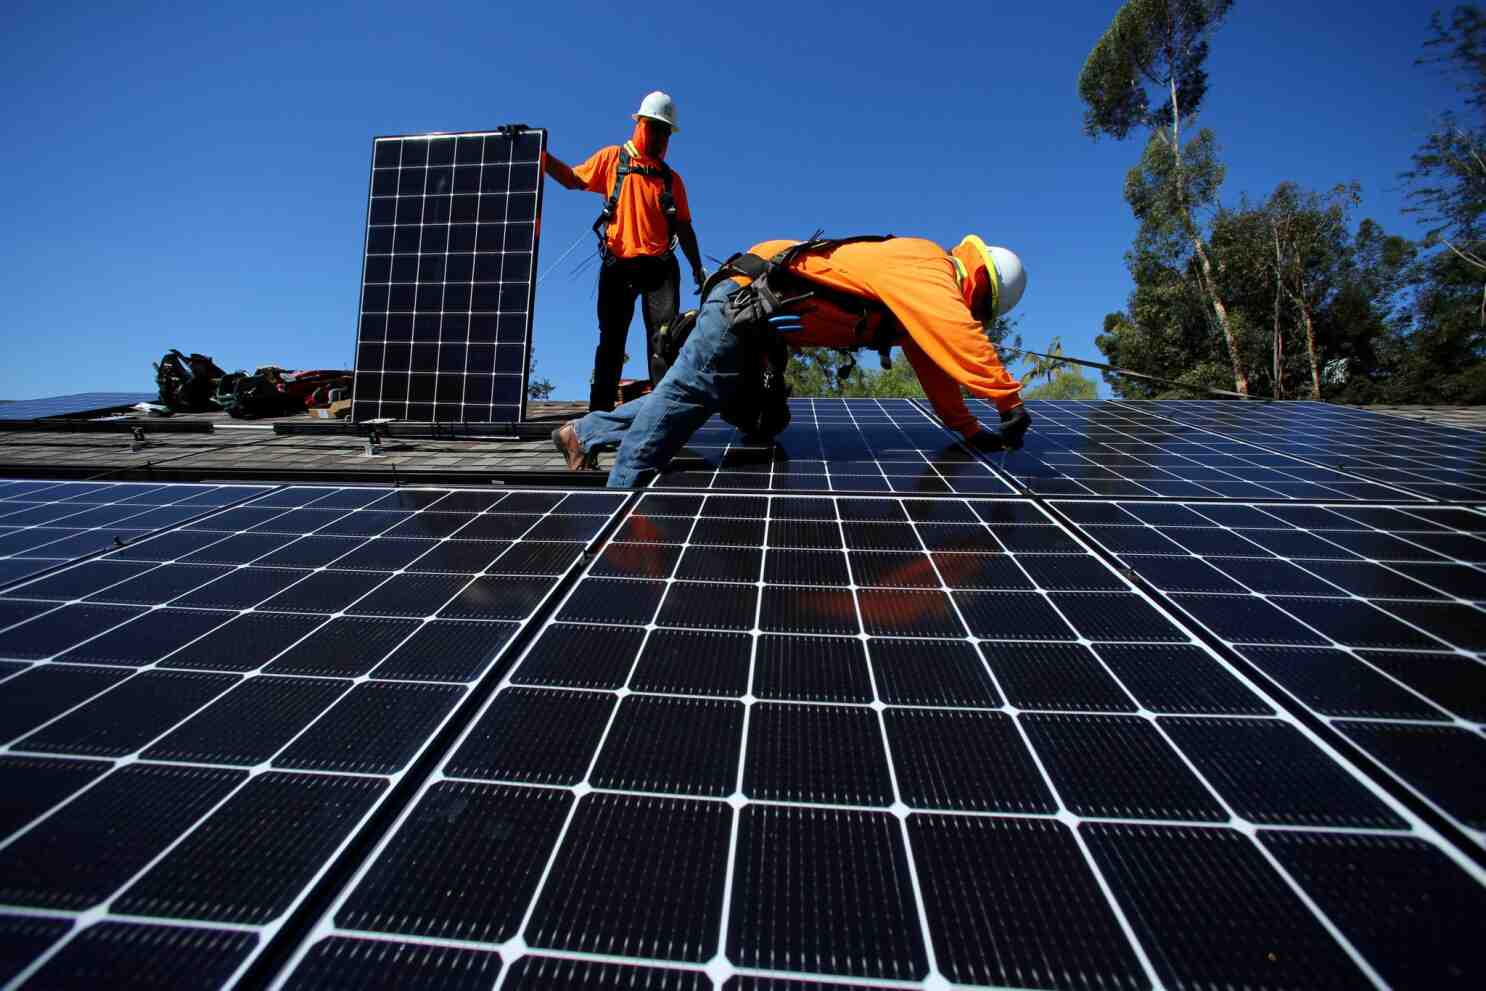 Is California offering free solar panels?